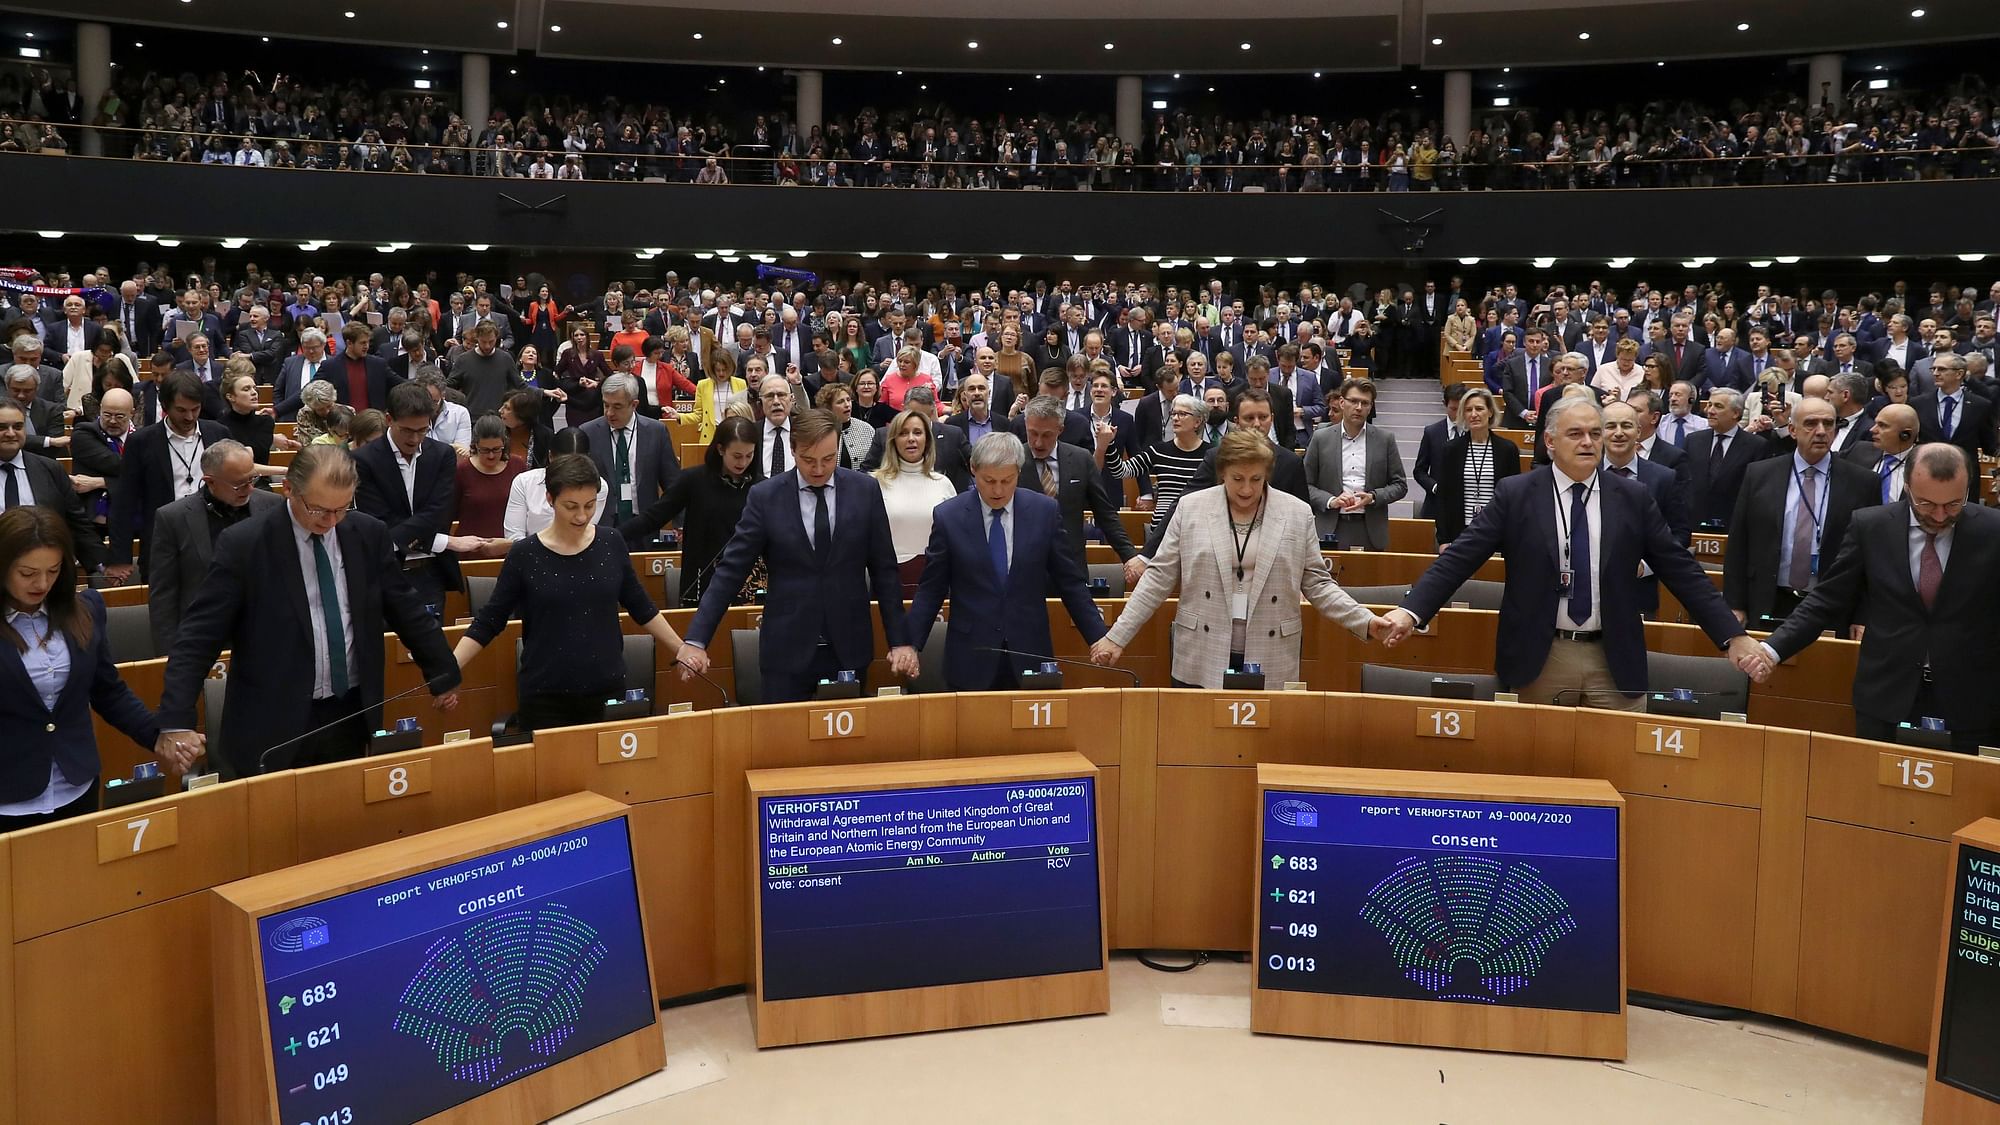 MEPs sing and hold hands after a vote on the UK’s withdrawal from the EU.